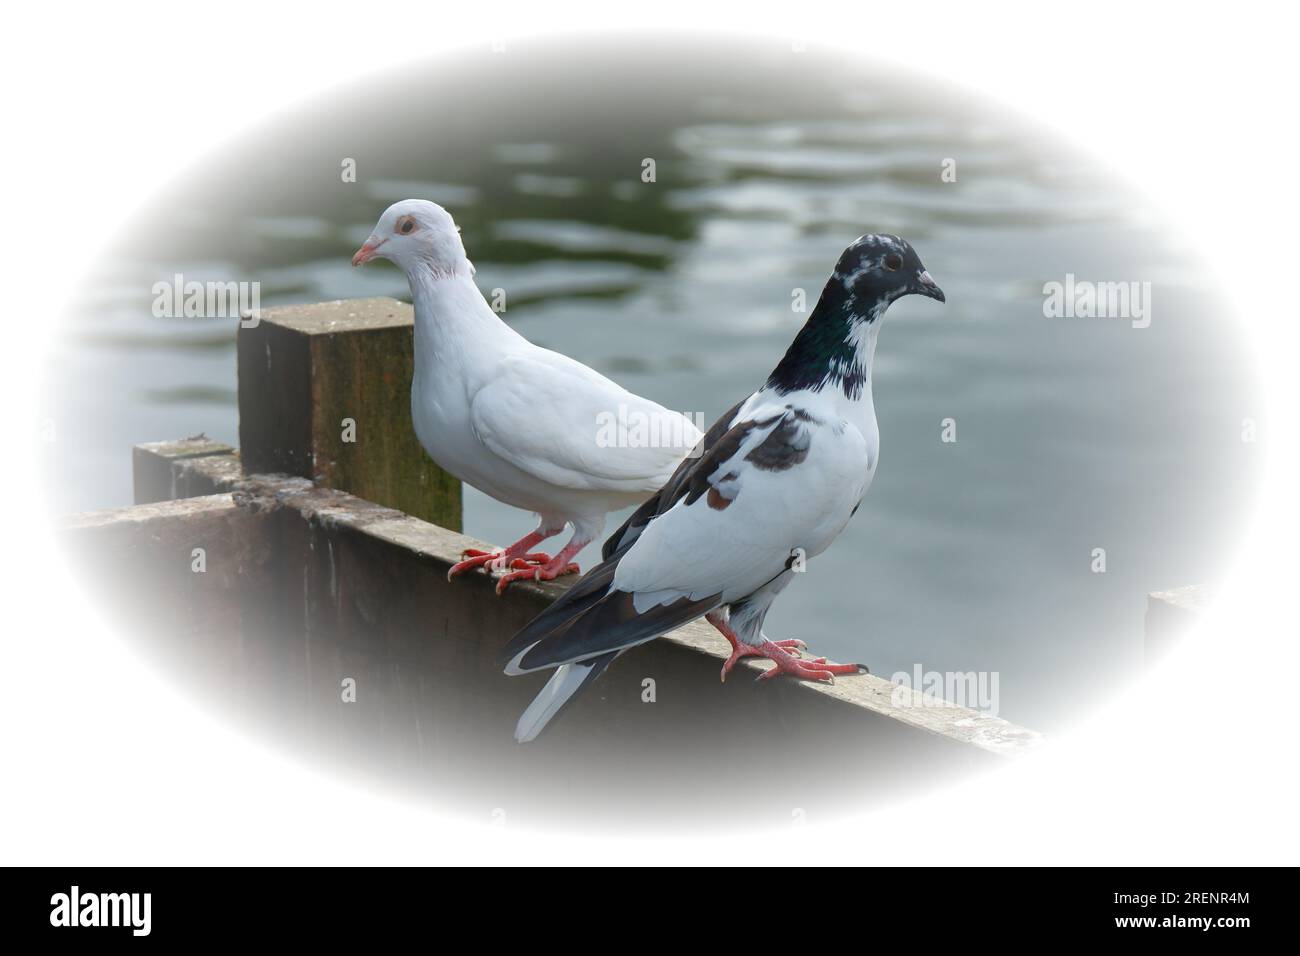 Two pigeons, one white the other black and white, standing on a fence rail each looking in opposite direction. Beside a lake with calm rippling water. Stock Photo